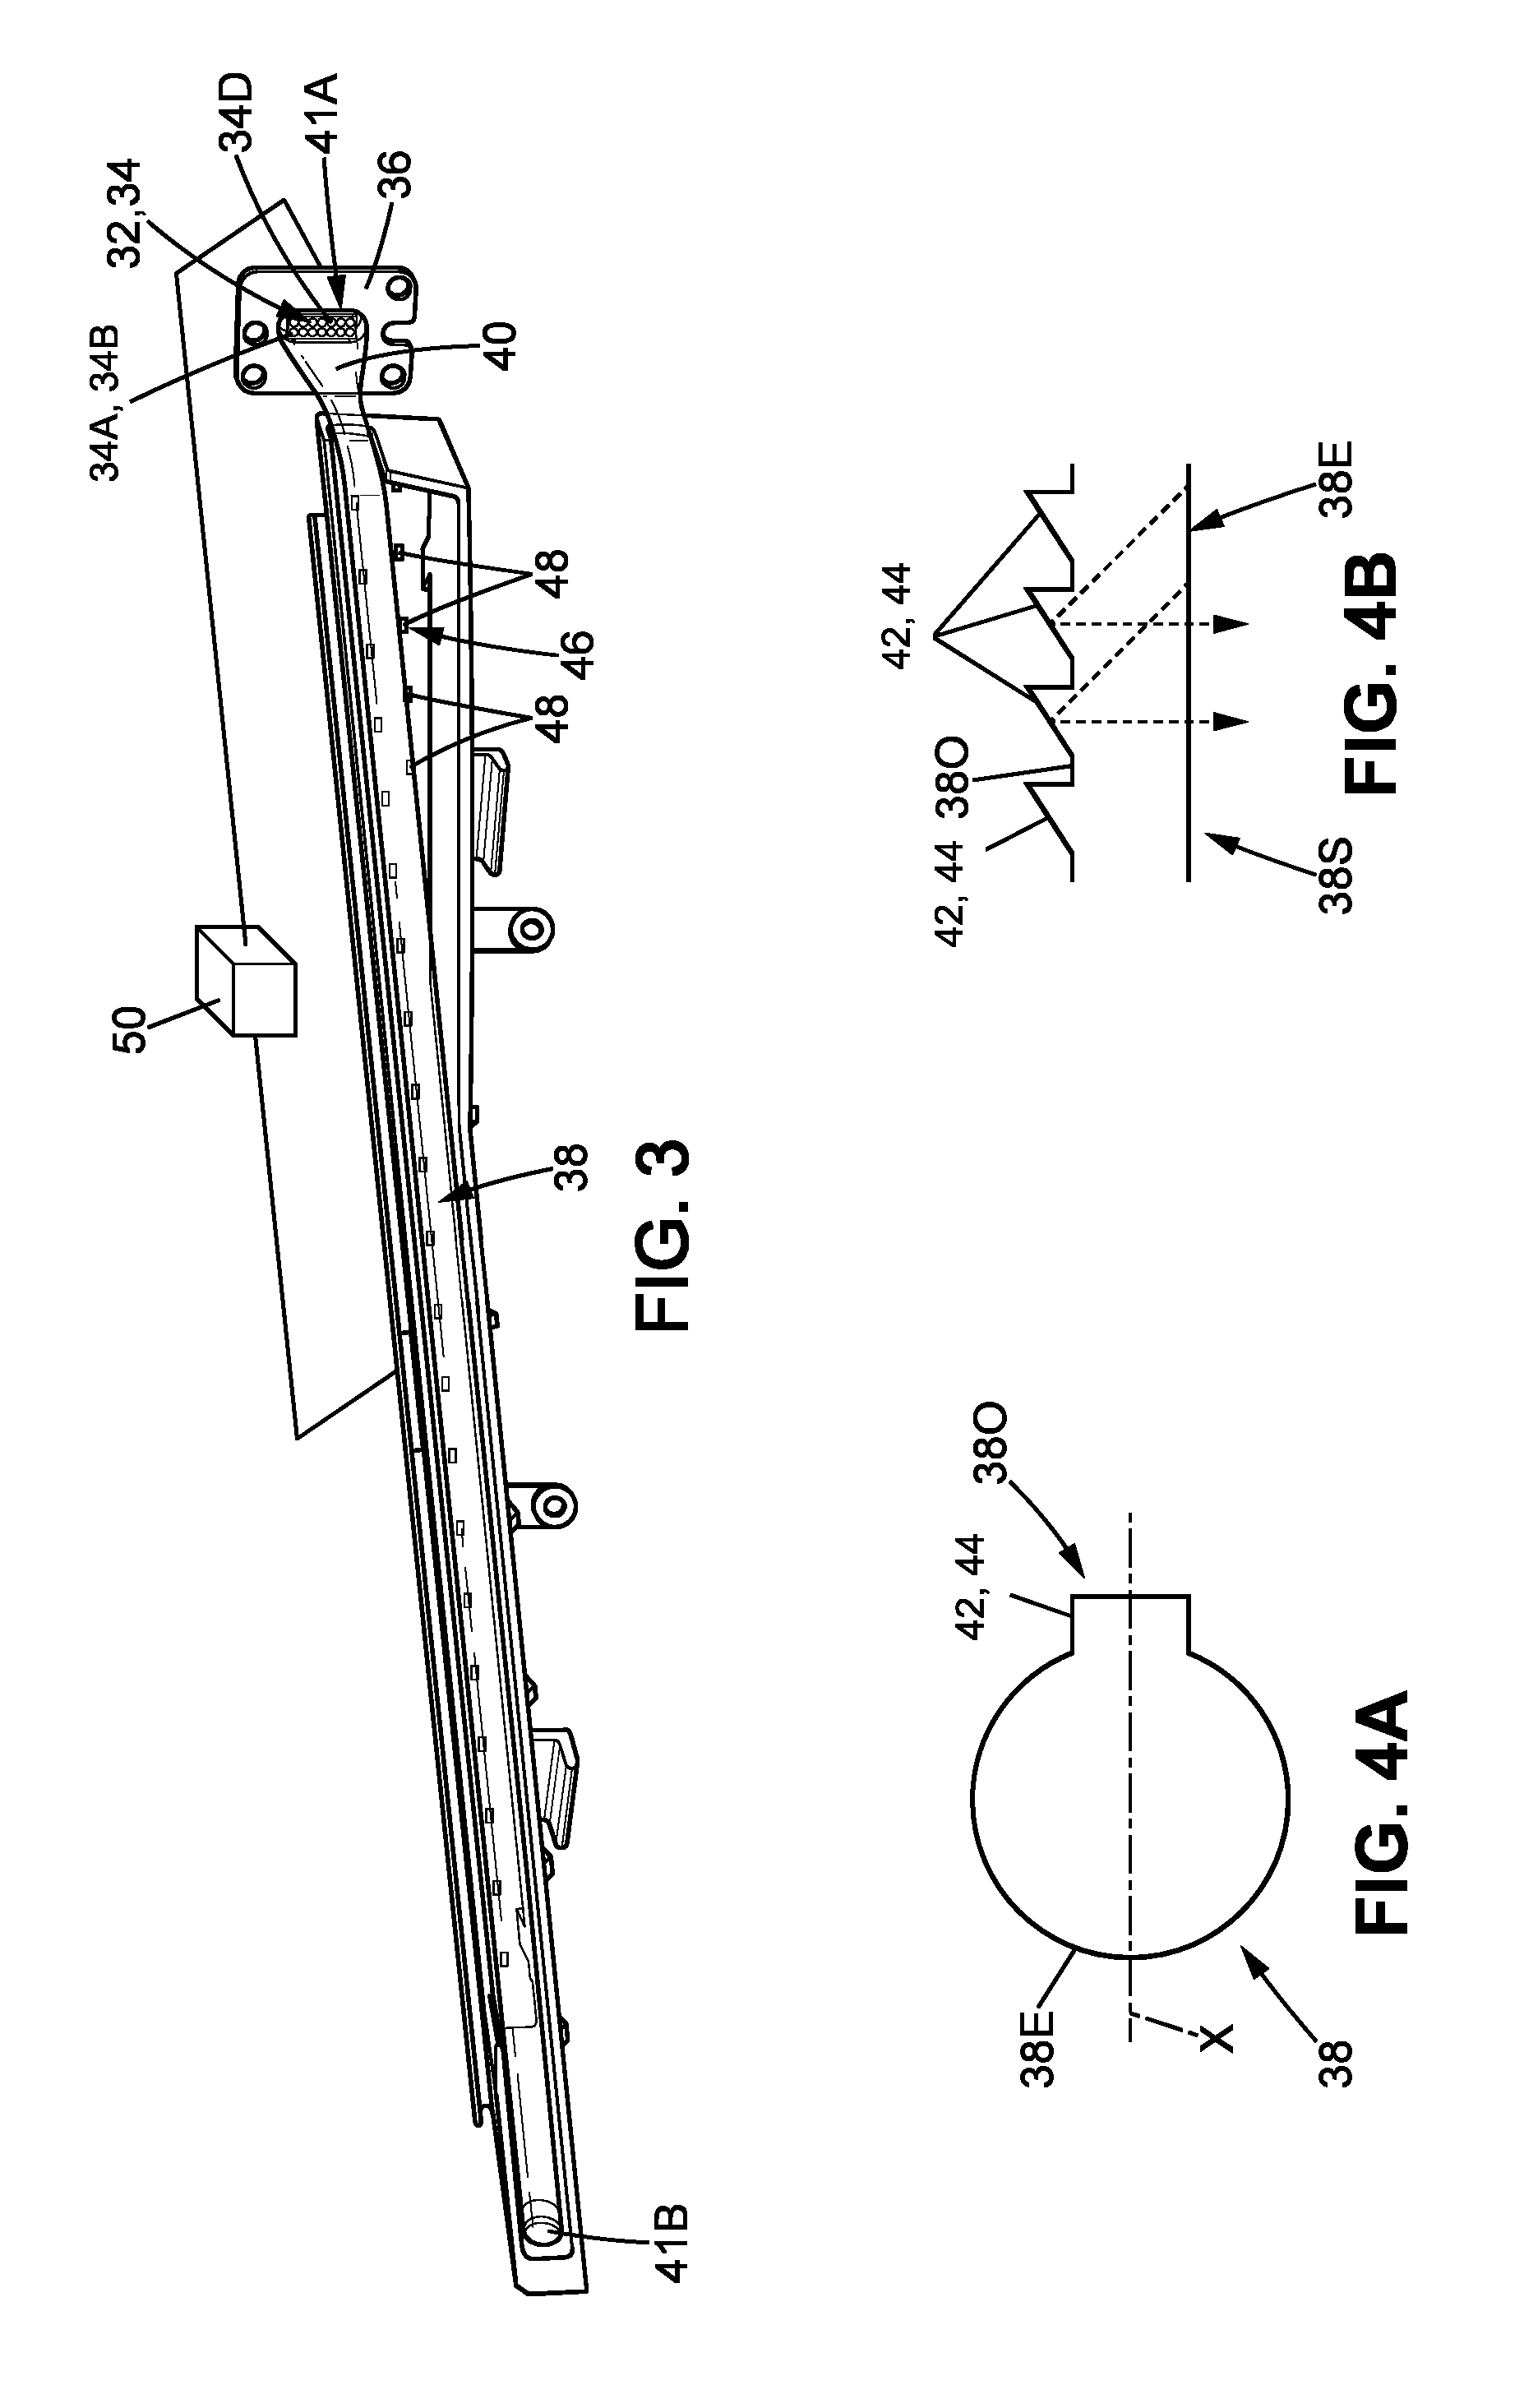 Optical system for a motor vehicle